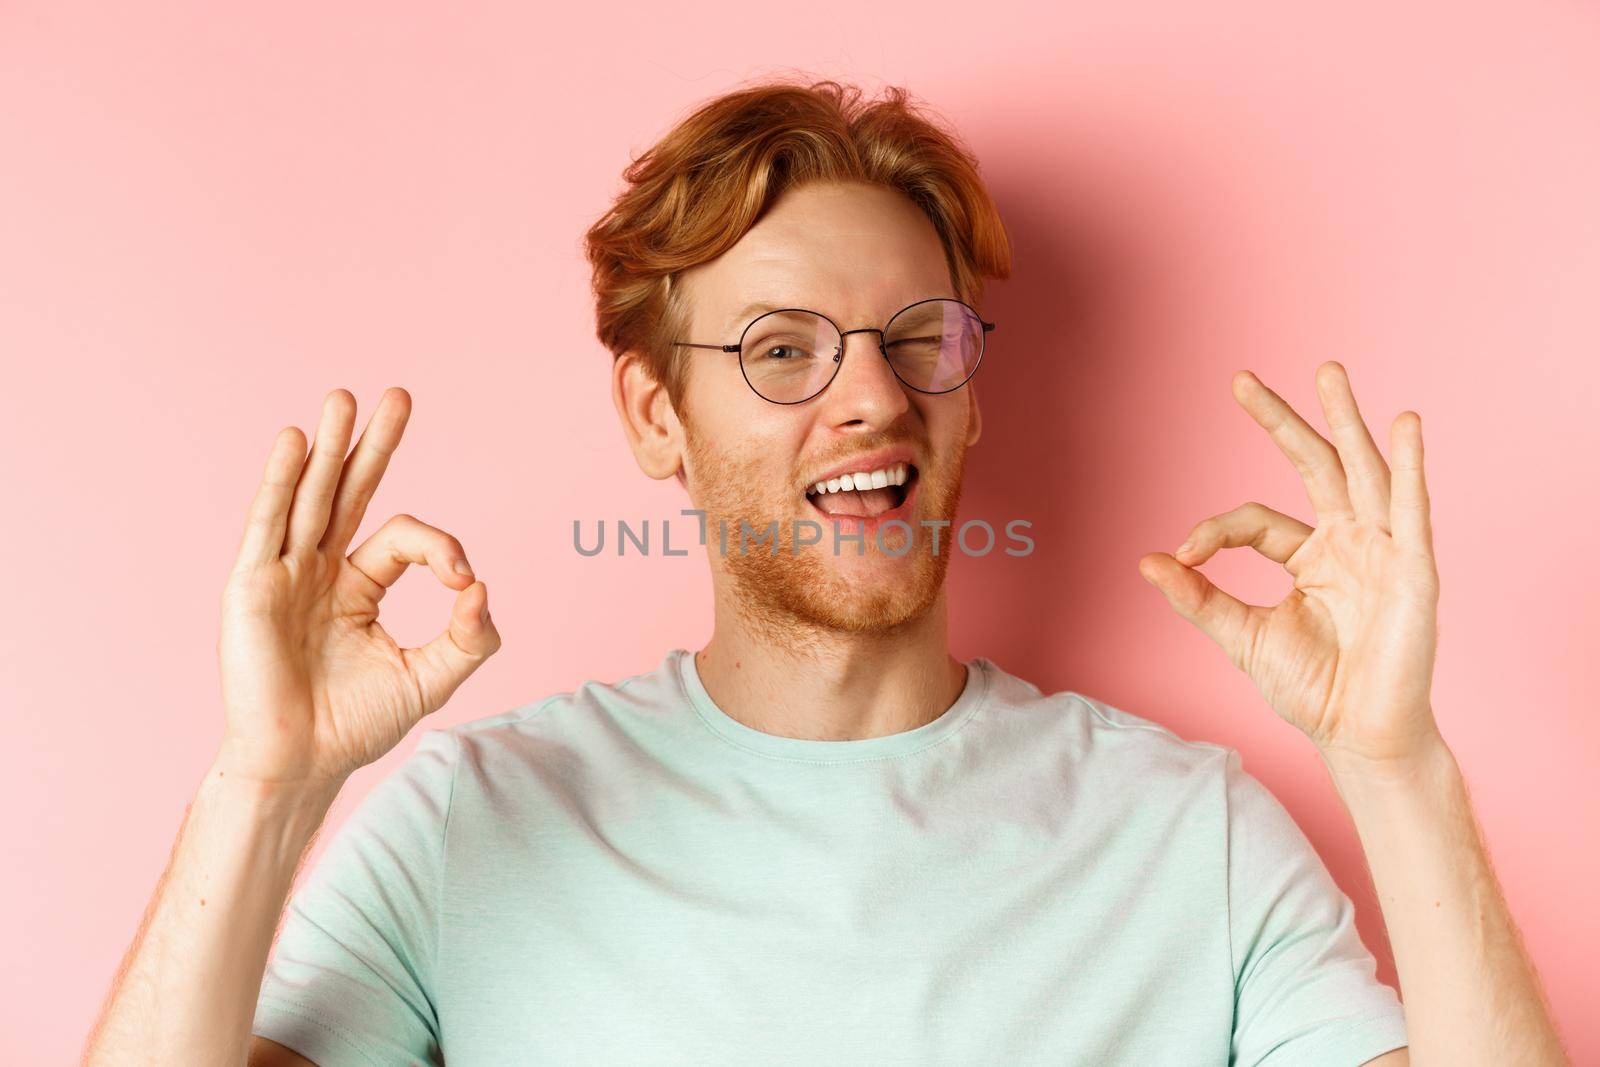 Cheeky redhaed guy in glasses assuring you, winking and showing okay signs, guarantee good quality, standing against pink background.